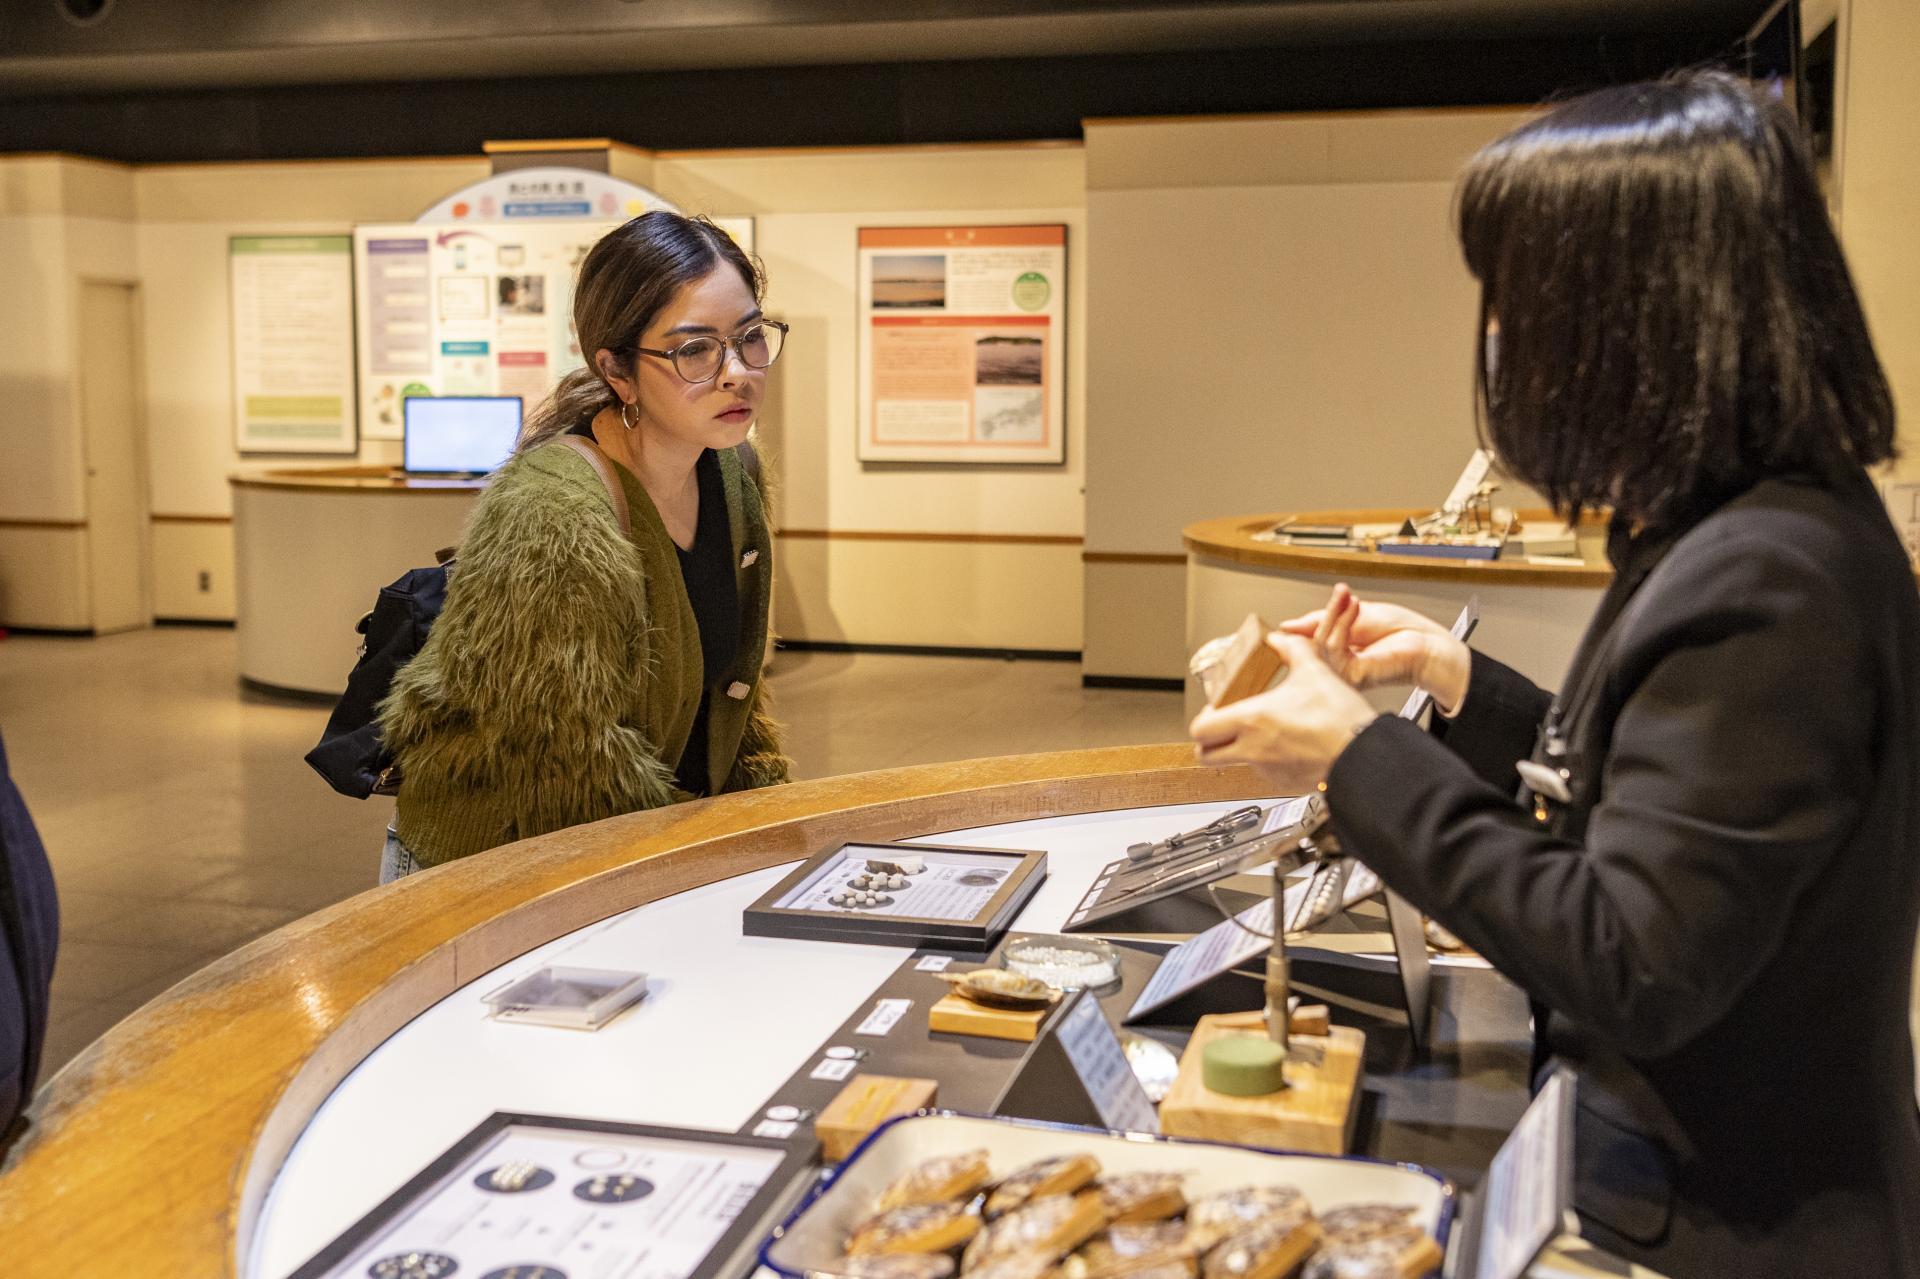 Learning about the pearl-making process from staff at the Mikimoto Pearl Island museum. They are very knowledgeable and were happy to answer many of my curious questions.